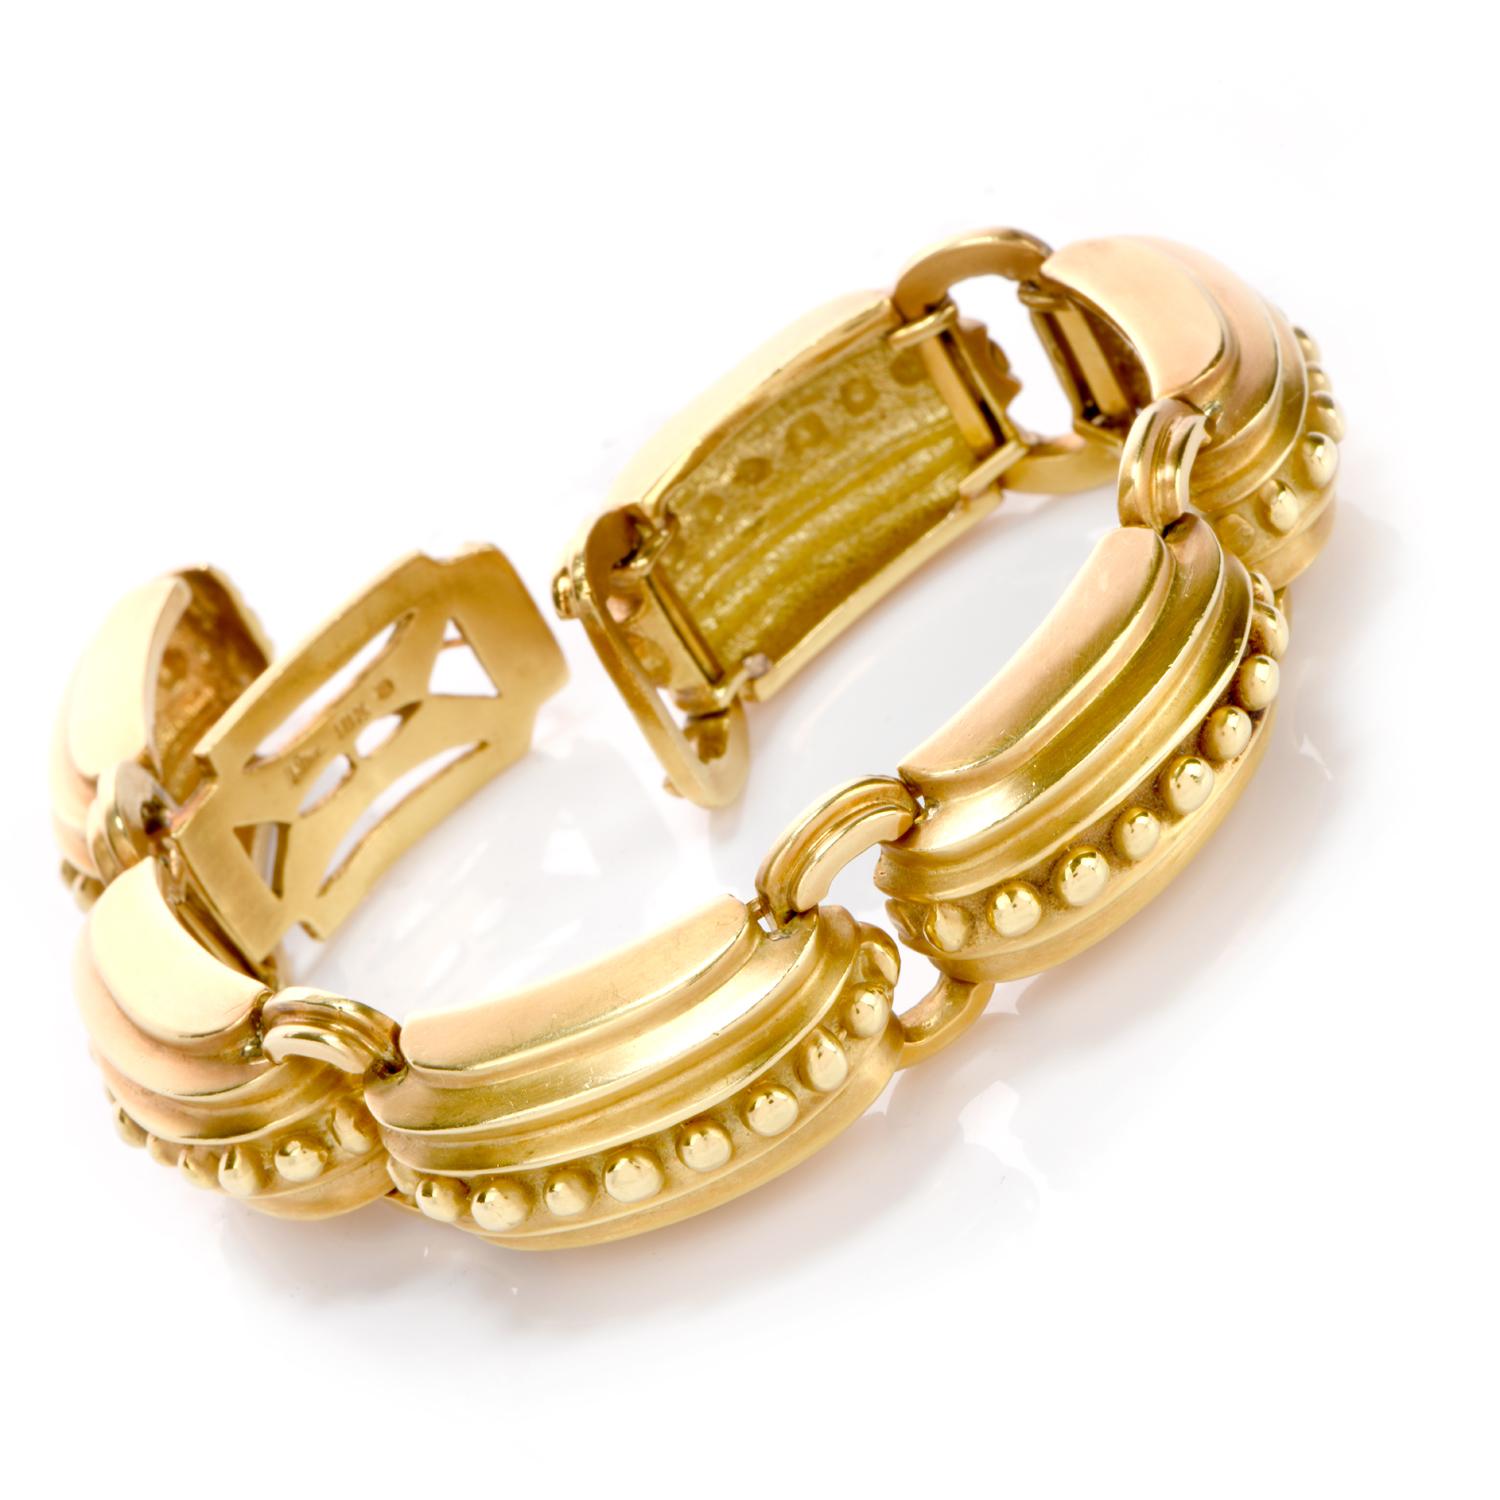 This beautiful Marlend Stowe bracelet was crafted in 86.6 grams of solid 18K green gold. Each link offers a nautical element as each is ribbed from the outside with each ridge higher than the last.  

Atop the staired design are large polished gold